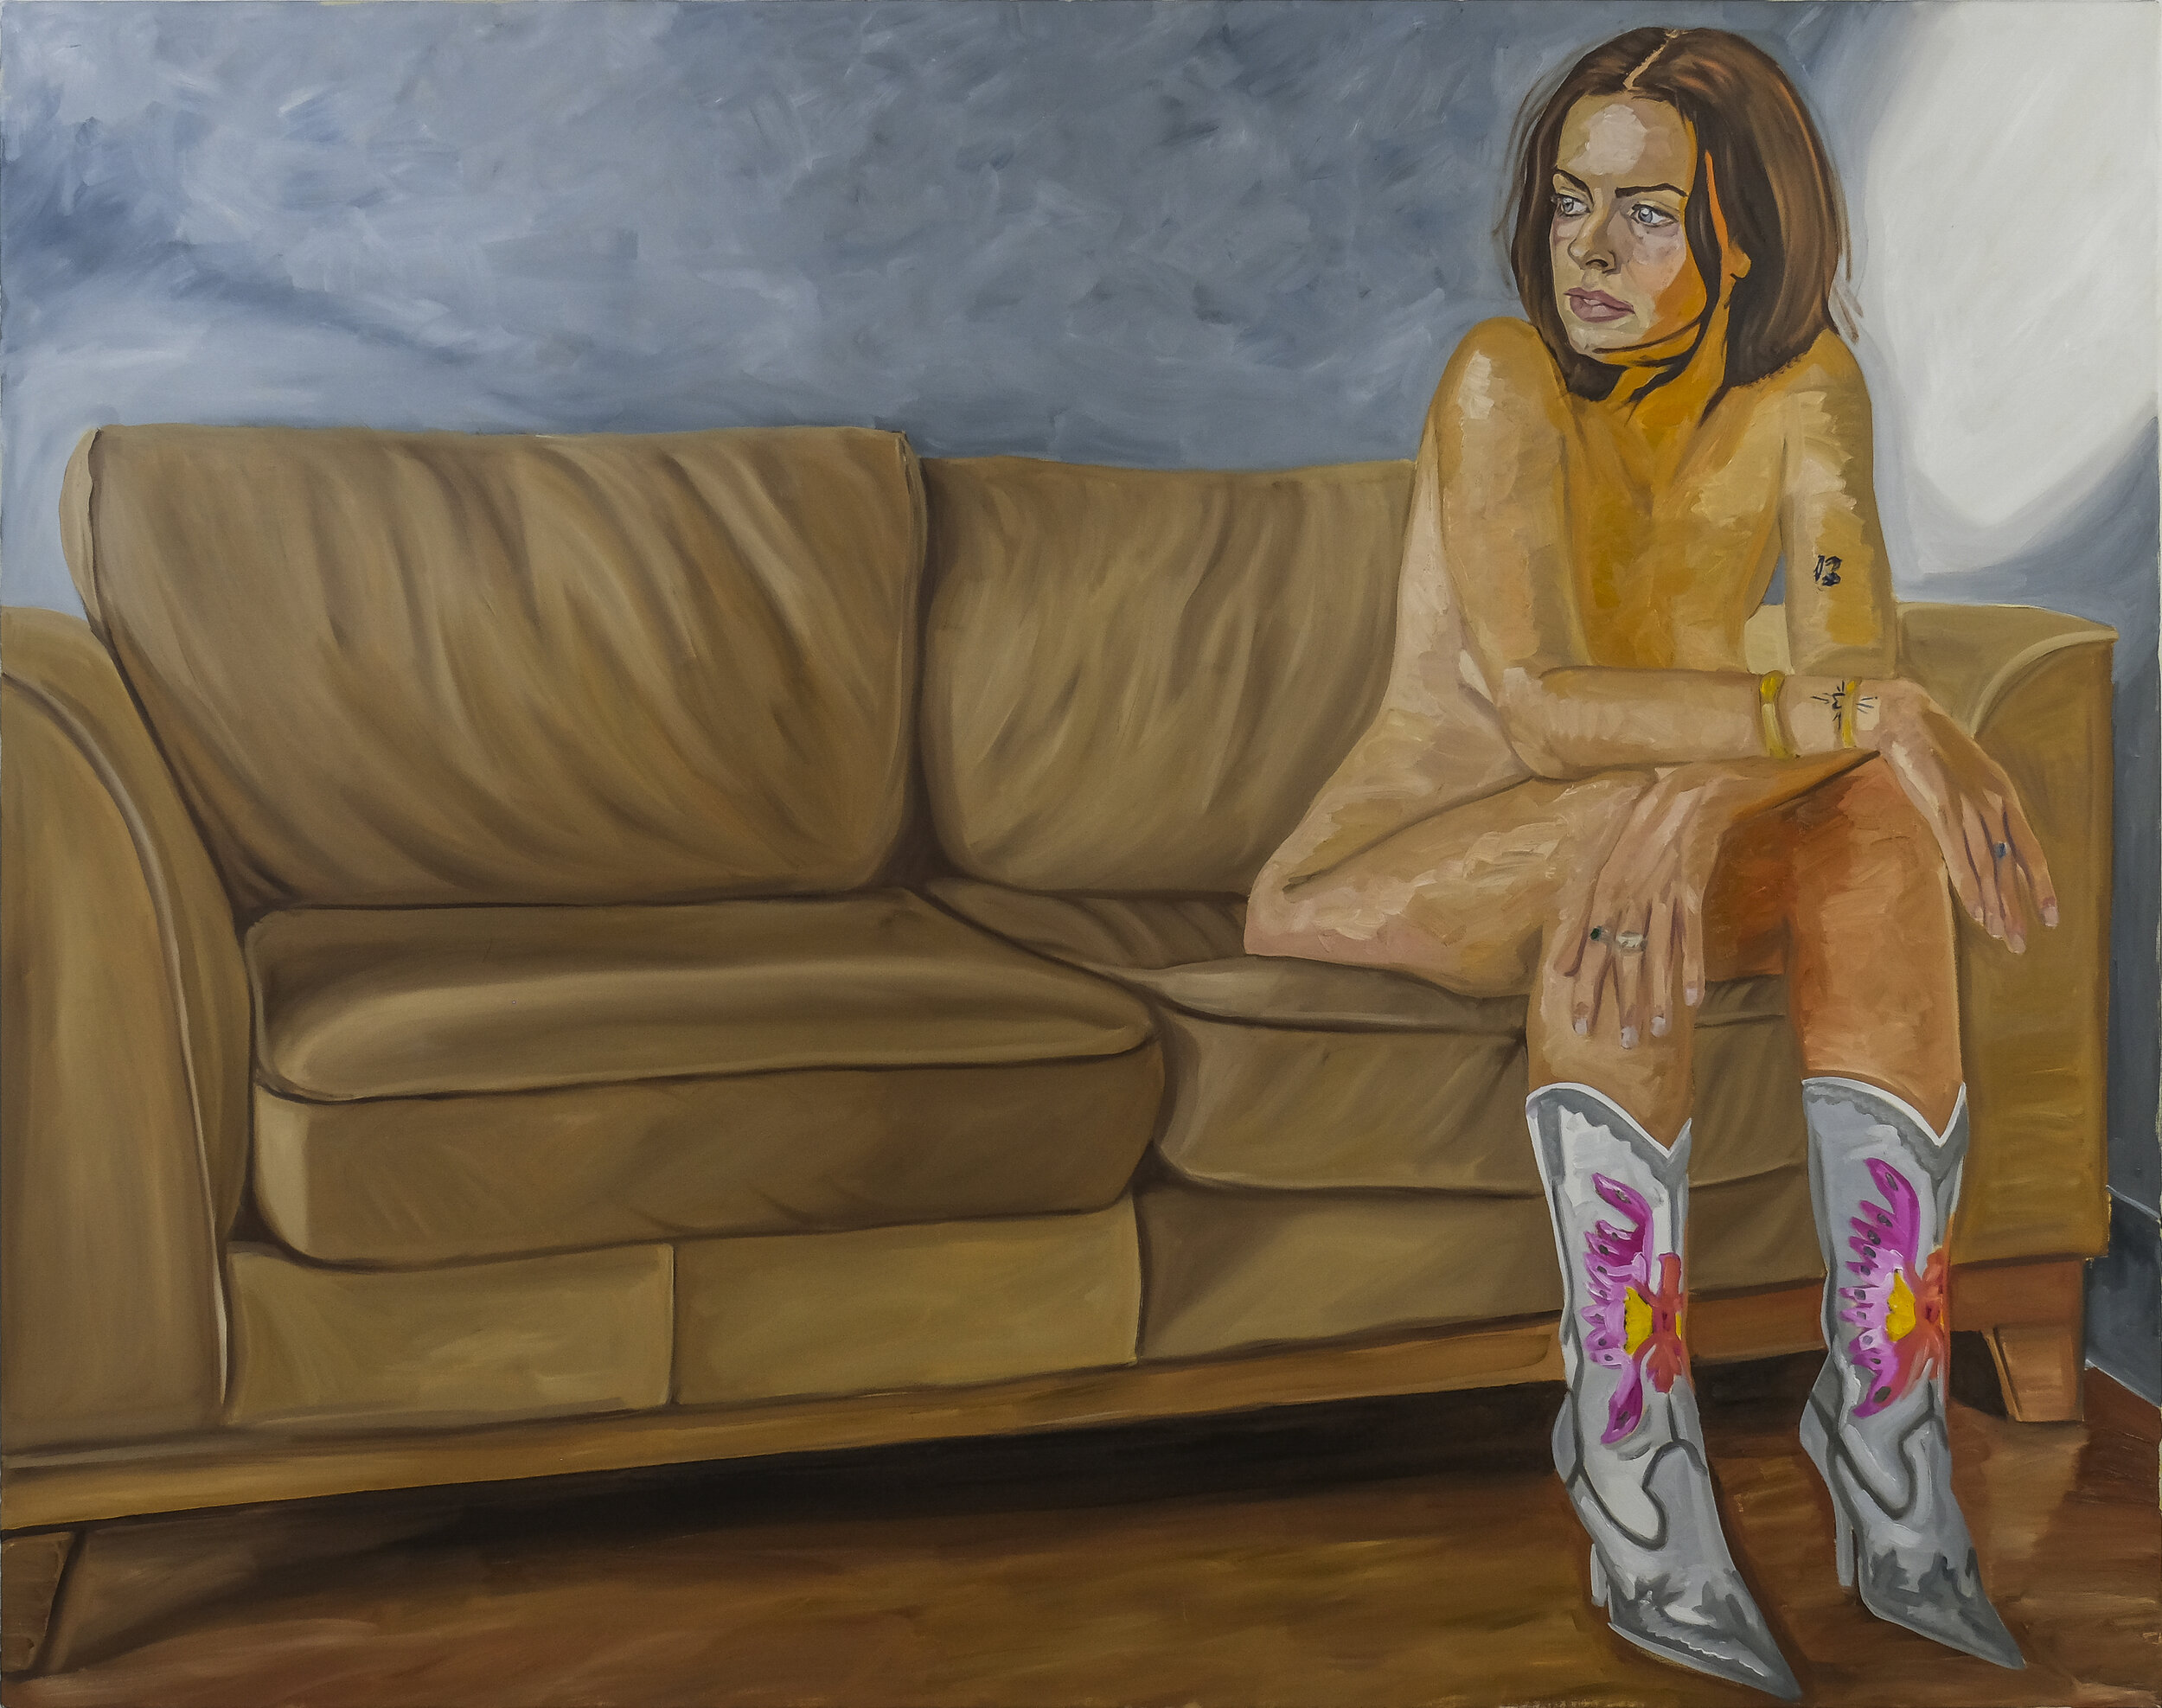   Boots and All   2021  Oil on canvas  190cm x 150cm 